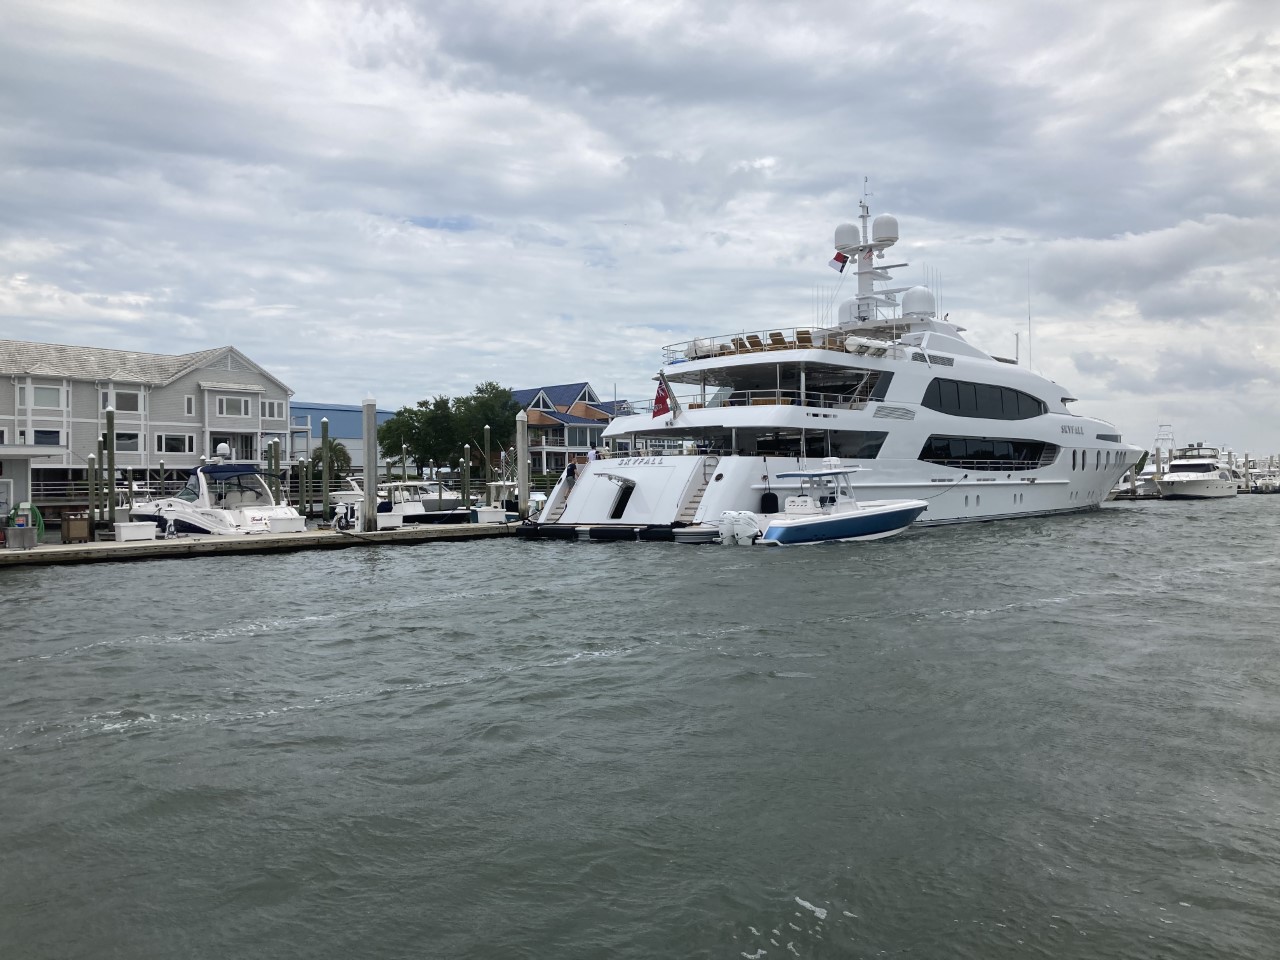 So, who owns that mega yacht docked at Wrightsville Beach?